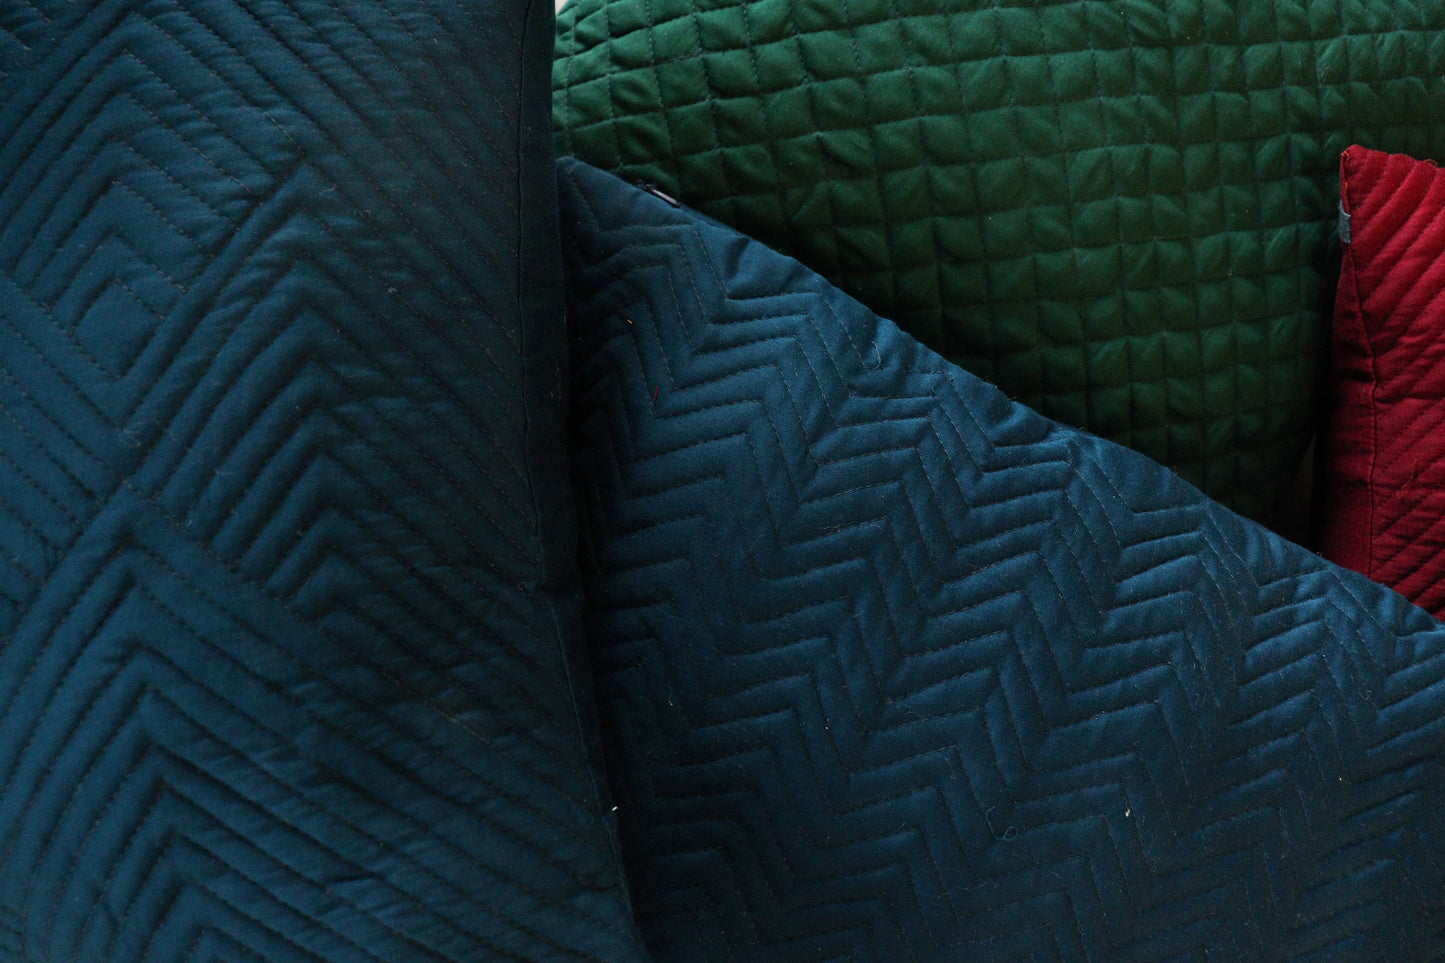 Blue Quilted Line Pattern Cushion